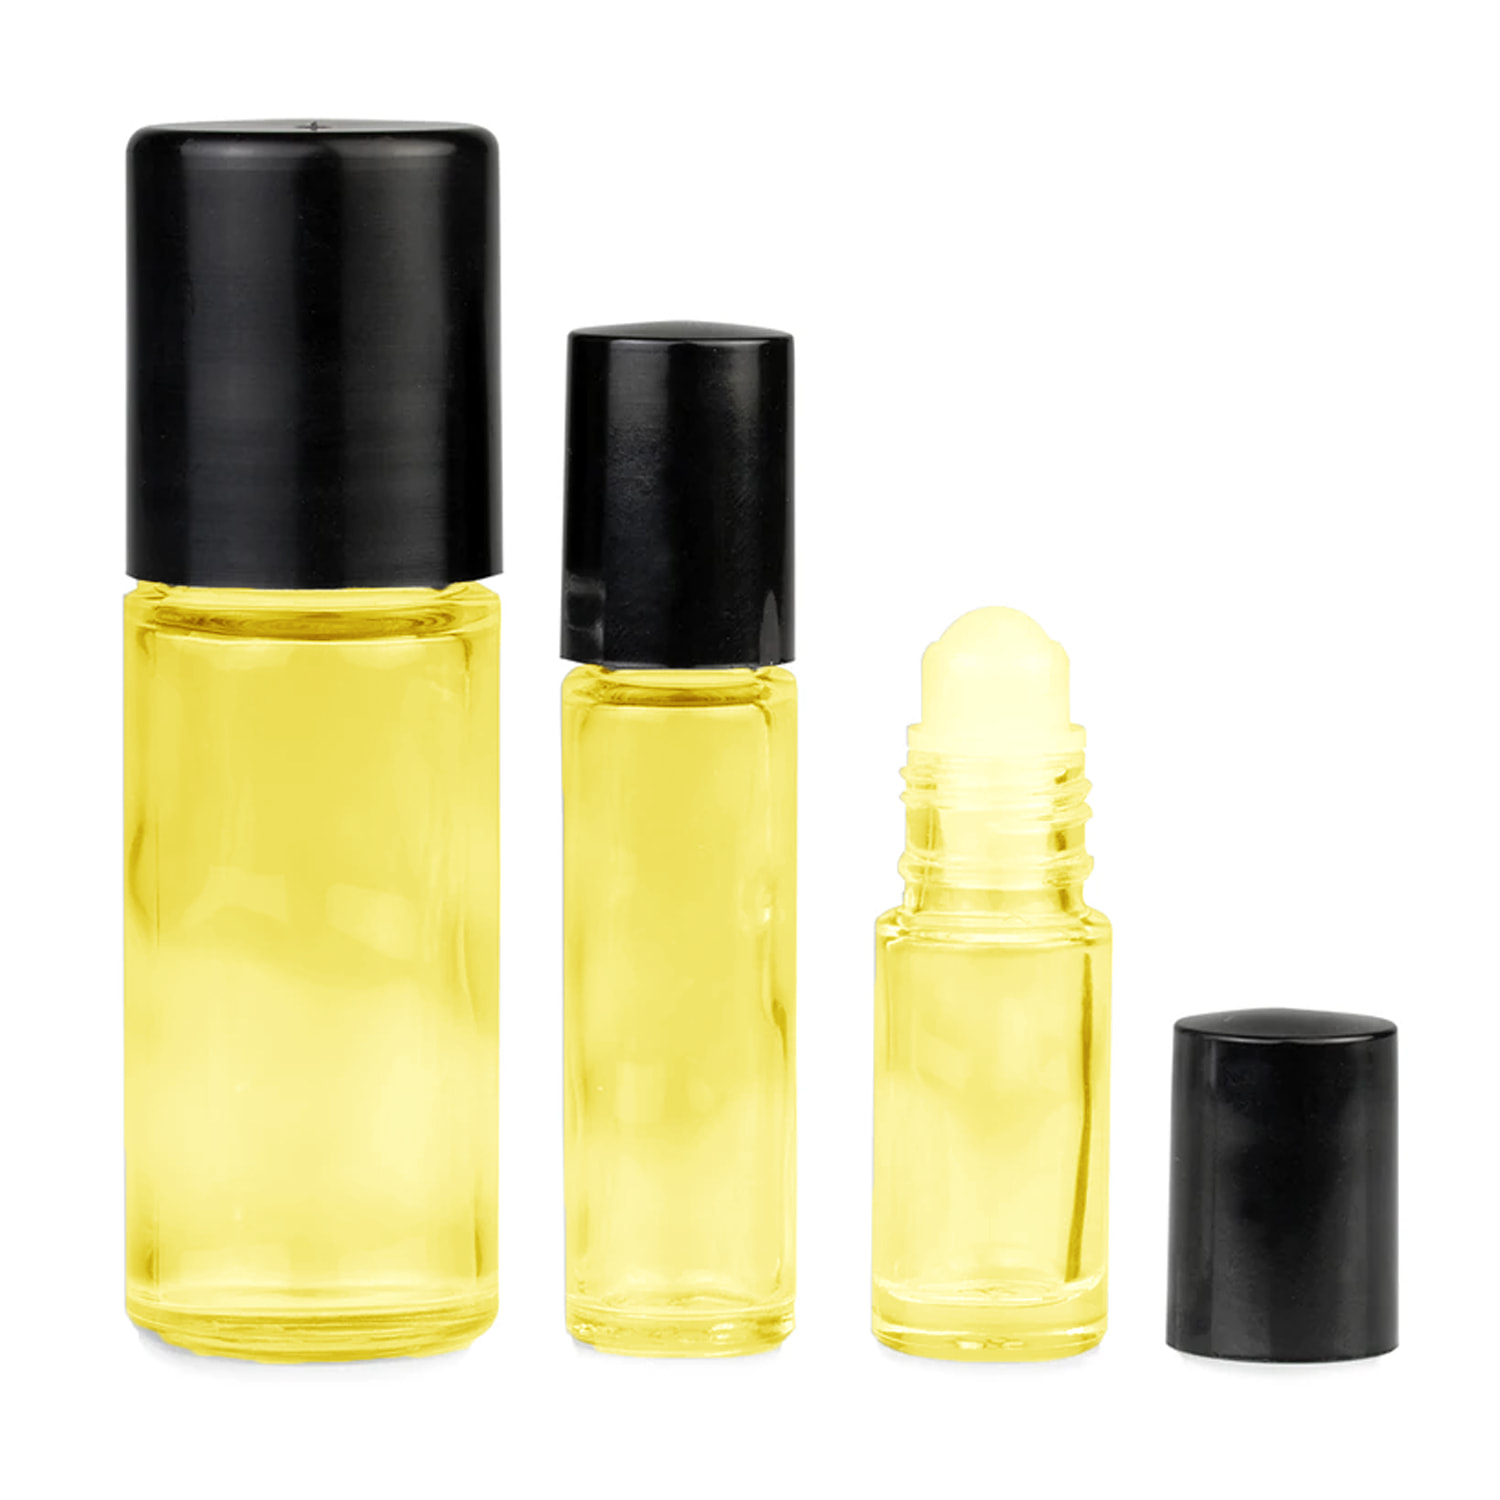 Angel Gold for Women Type Body Oil-Alcohol Free Fragrance-Concentrated  Perfume-10 ml-Not Name Brand Product